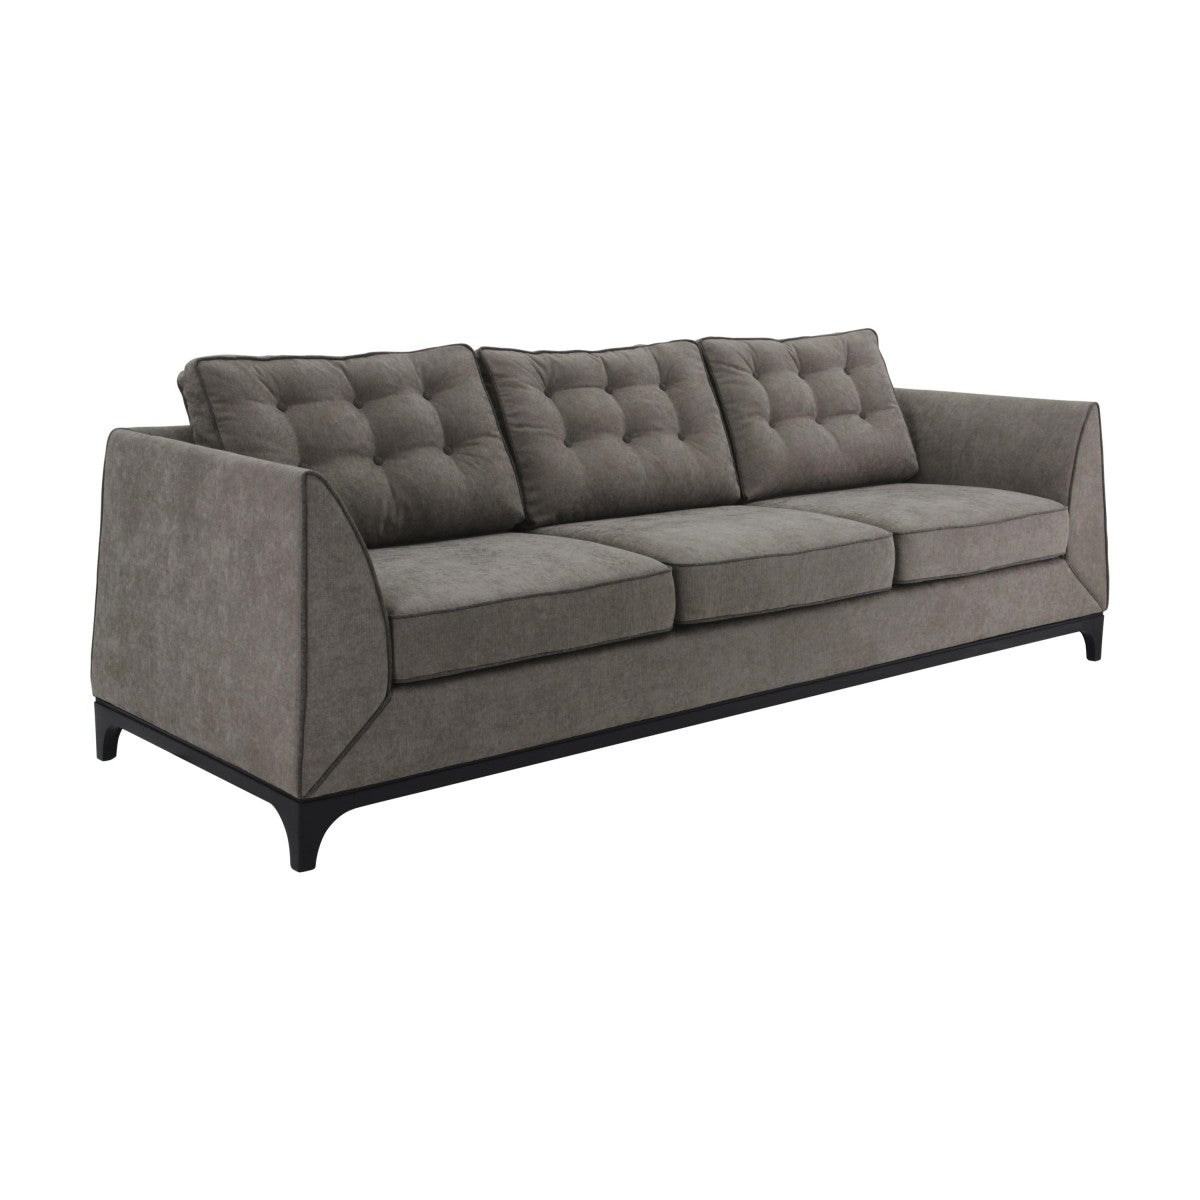 Mysterio Bespoke Upholstered Modern Style Five Seater Sofa MS9624G Custom Made To Order